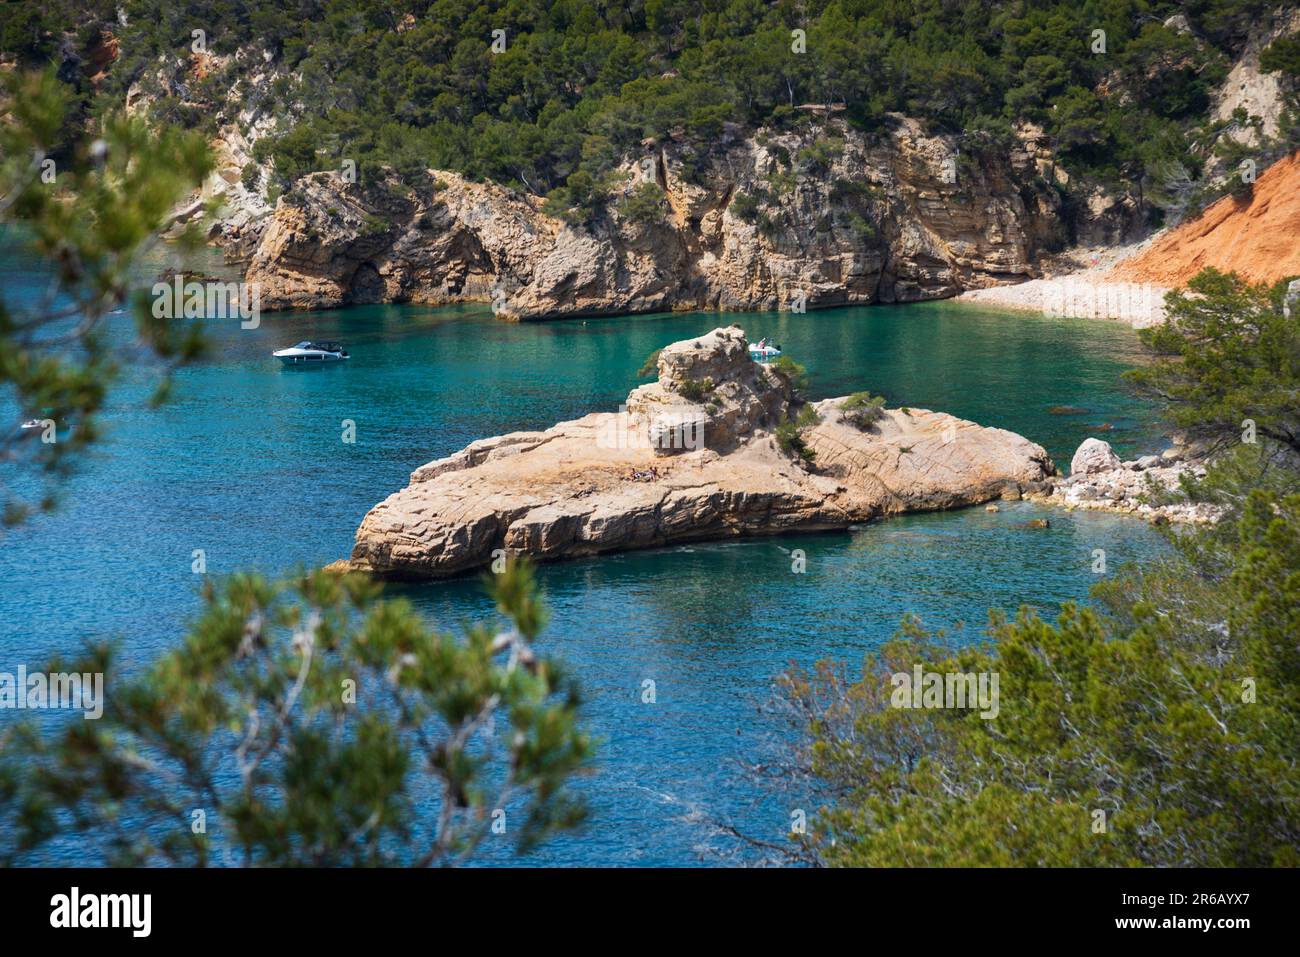 People sunbathe on Galley rock or Submarine rock. View  from hiking path near Calanque de Port d'Alon (between Saint-Cyr-sur-Mer and Bandol), France. Stock Photo